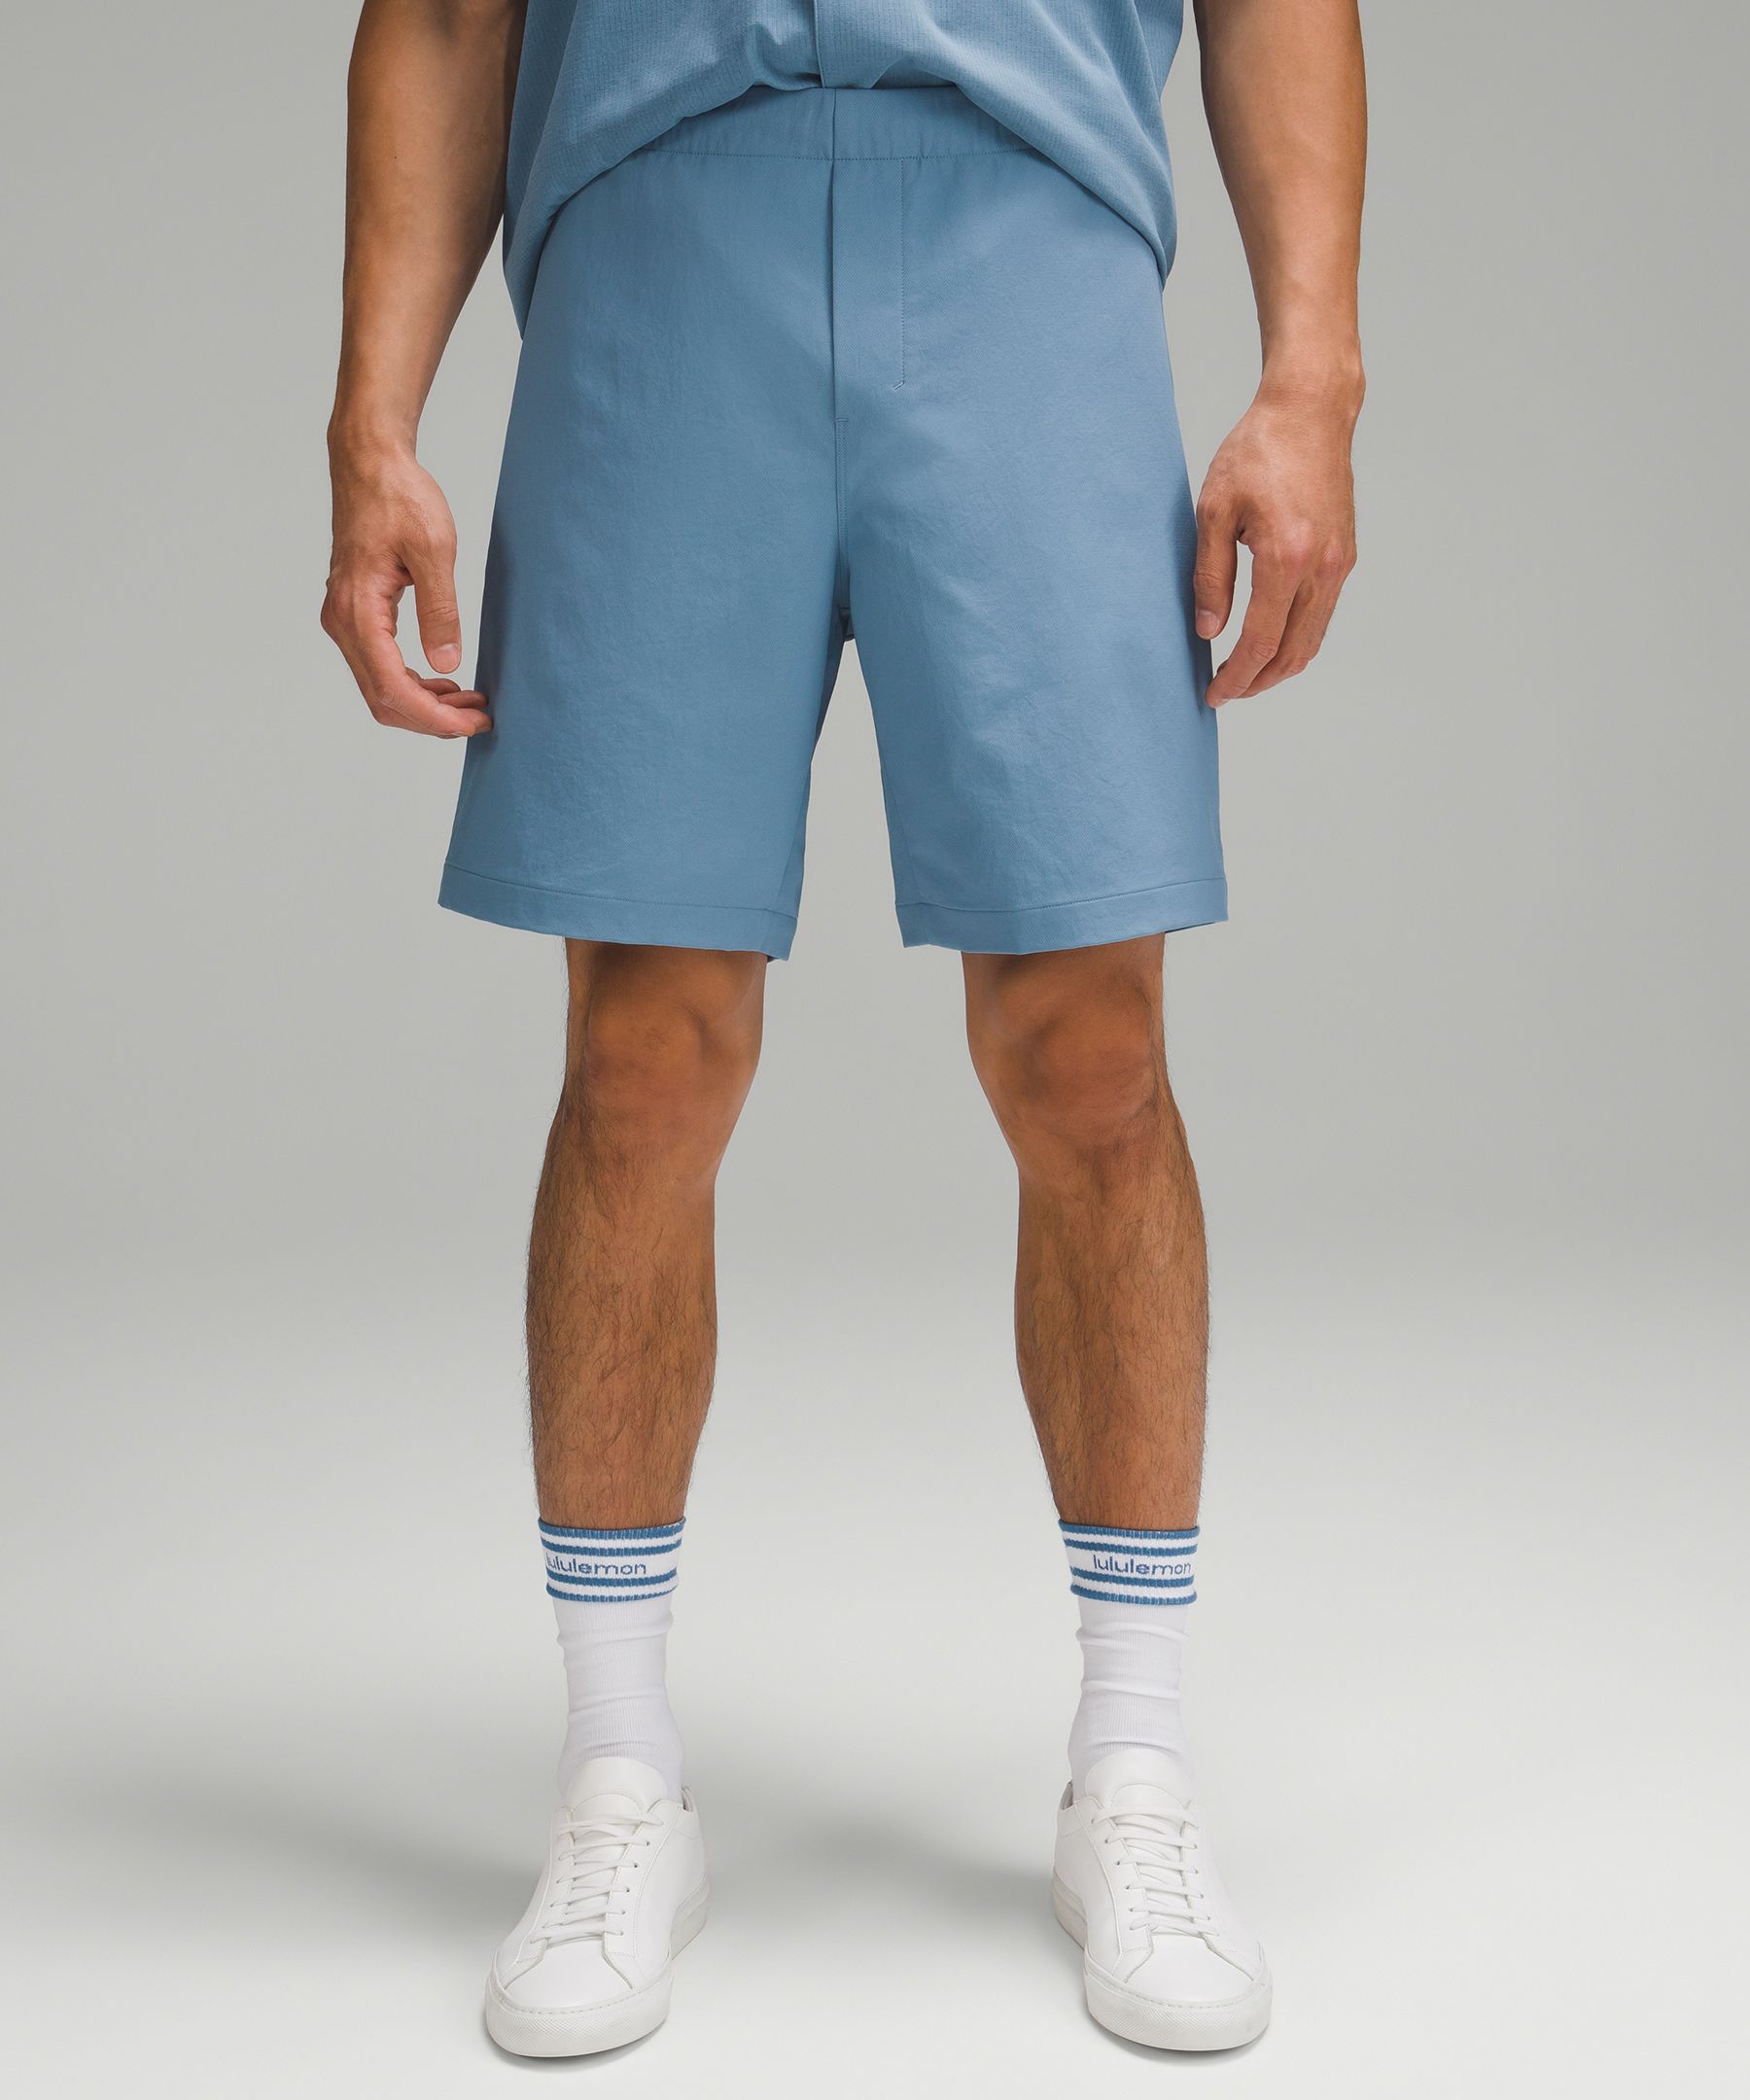 We Made Too Much Sale: Best discounts on Lululemon shorts this week  (6/8/23) 